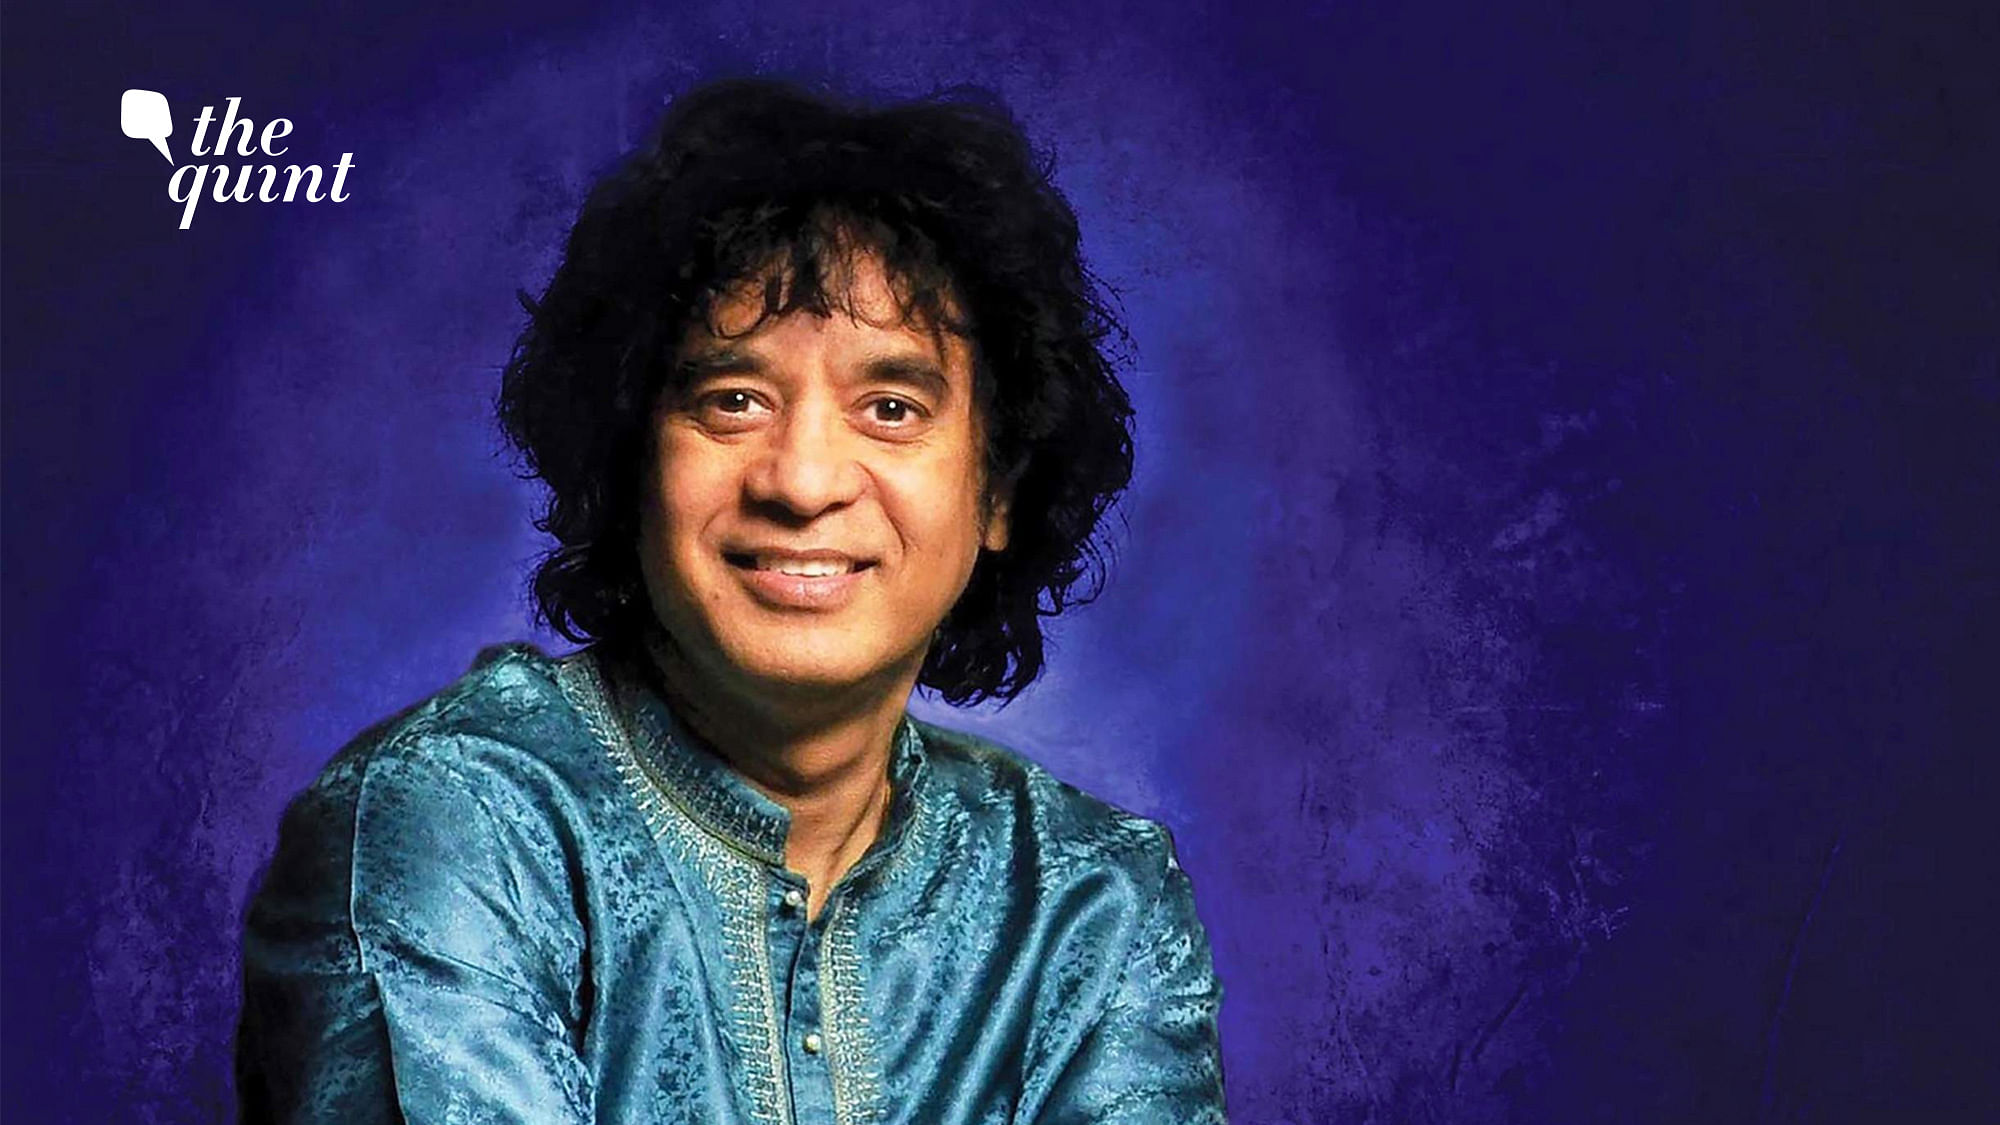 The Quint caught up with Zakir Hussain to talk about his father, Allah Rakha and growing up in a musician’s household